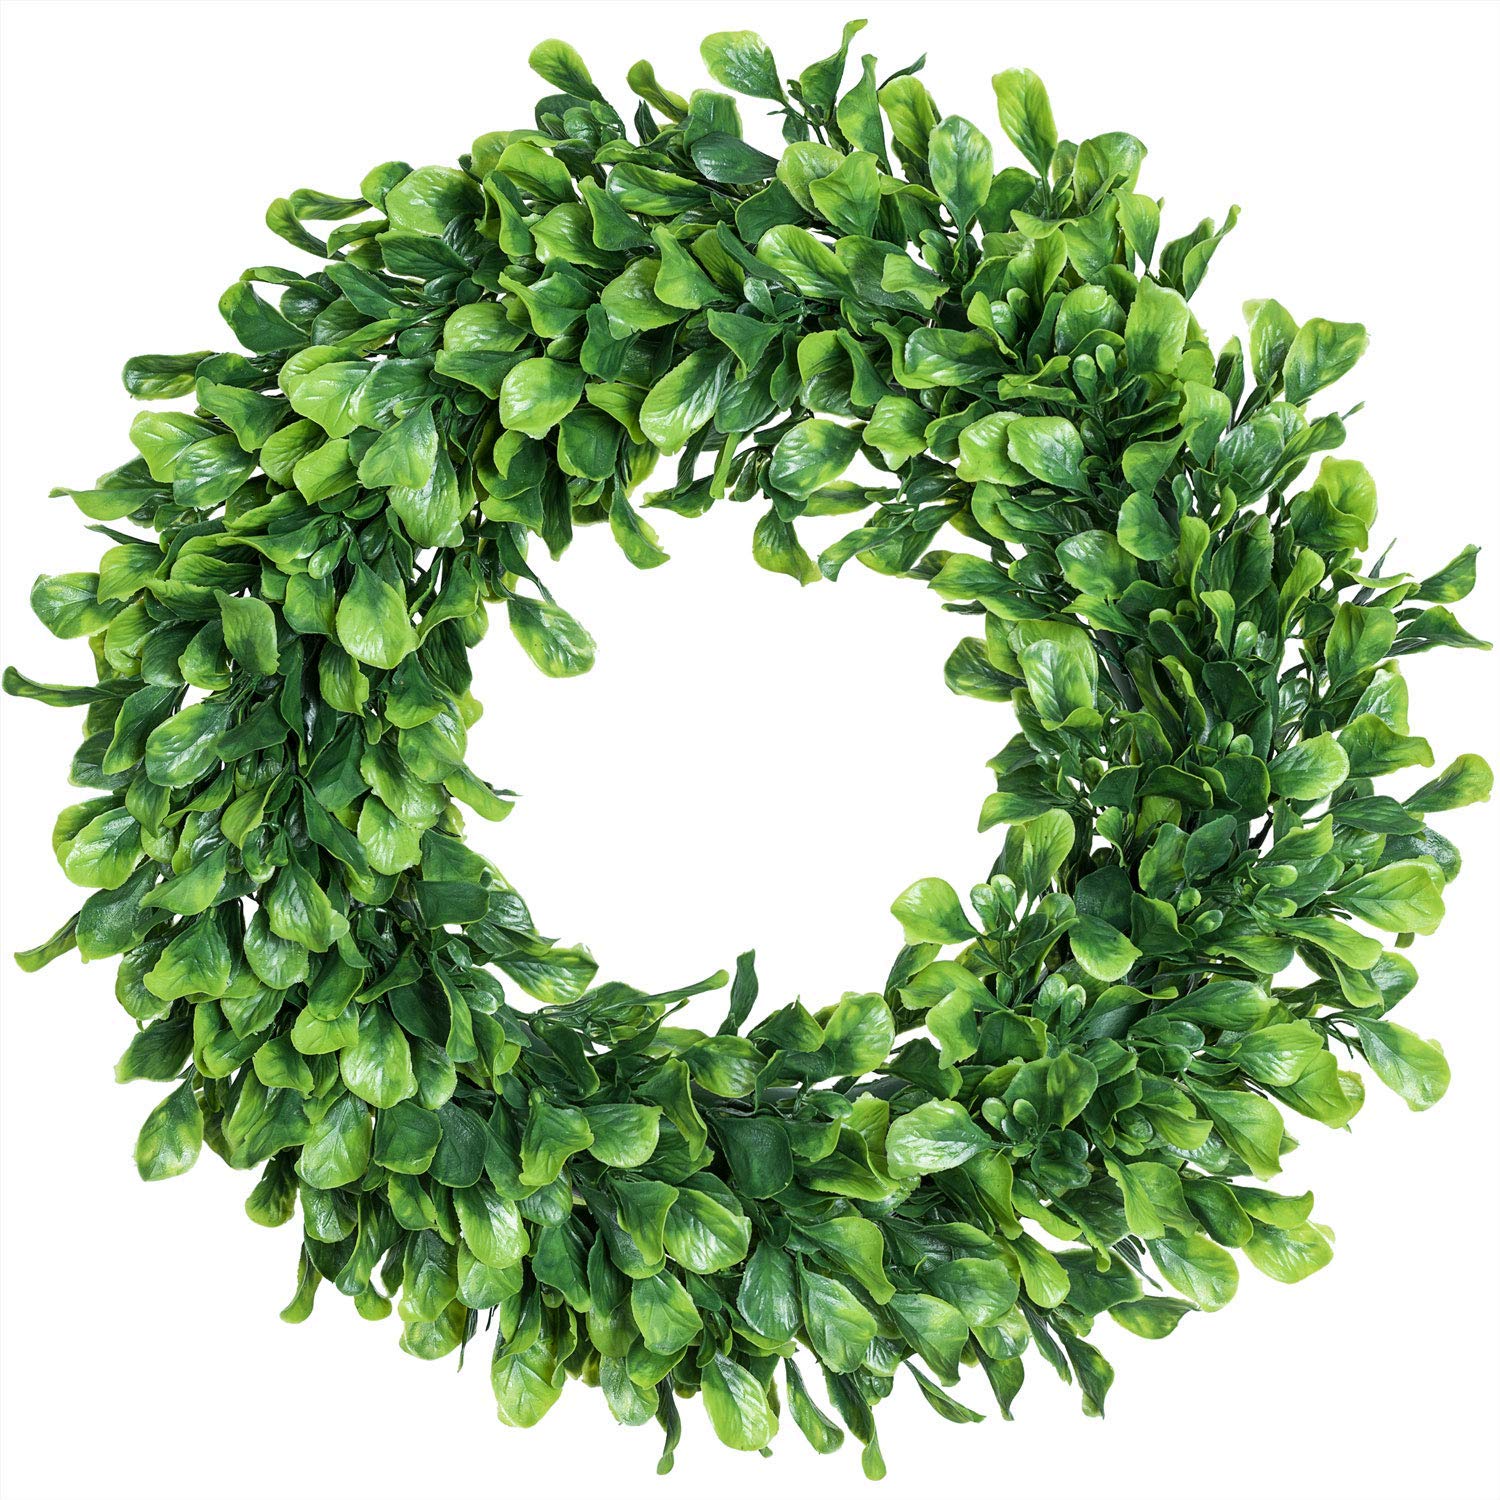 Lvydec Artificial Green Leaves Wreath - 15" Boxwood Wreath Outdoor Green Wreath For Front Door Wall Window Party D茅cor